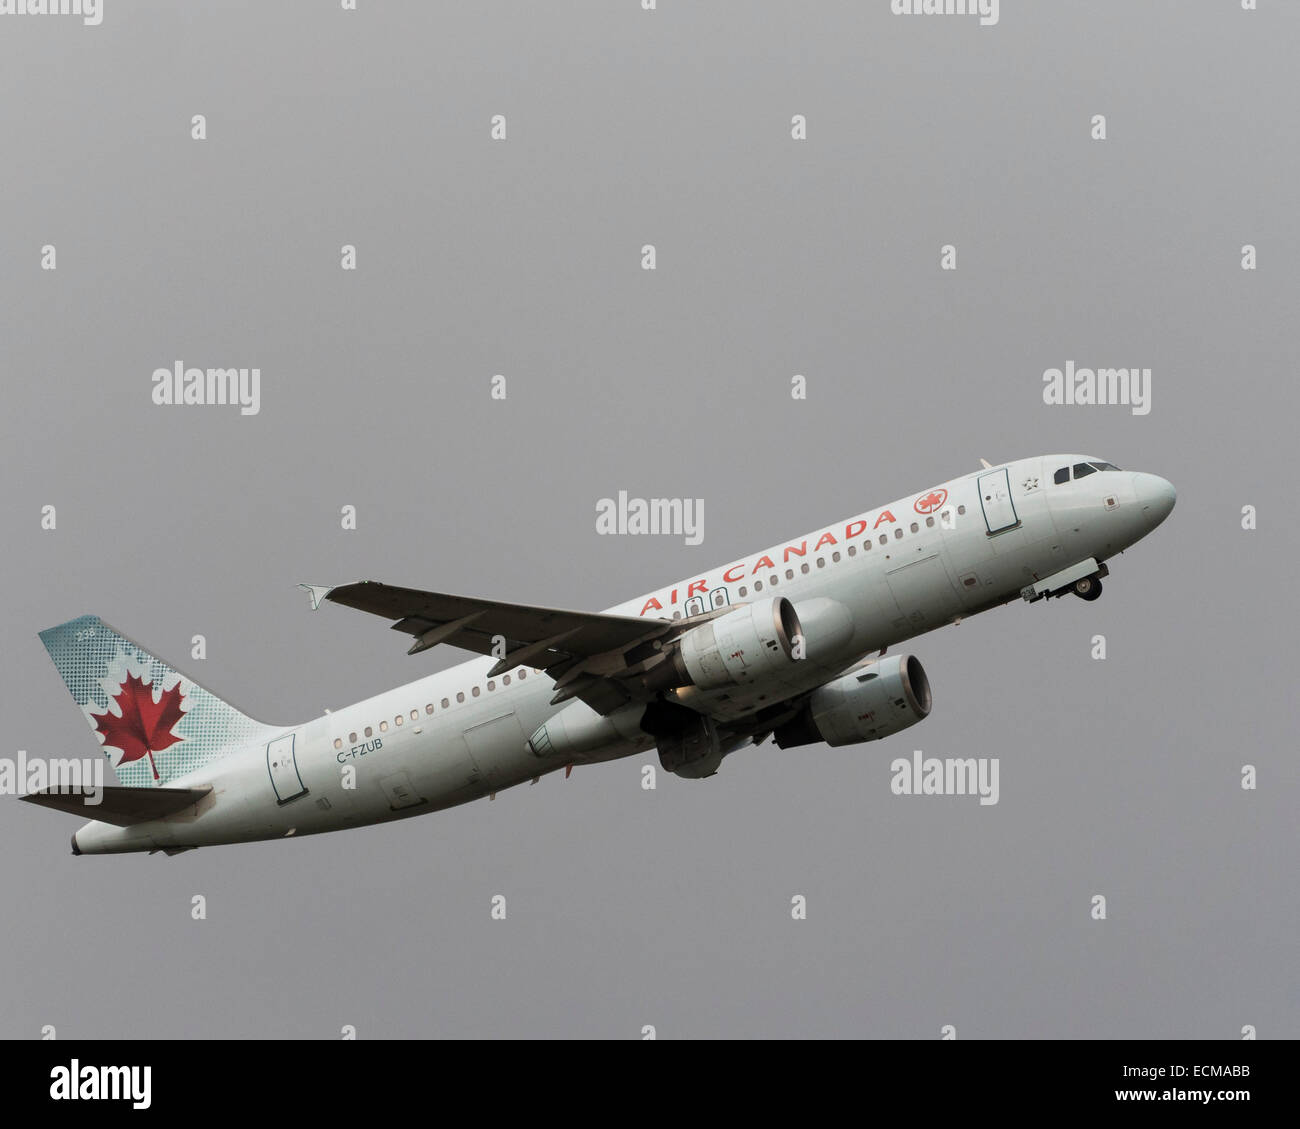 An Air Canada Airbus A320(C-FZUB; fin#238) airliner departs from Vancouver International Airport, Canada. Stock Photo